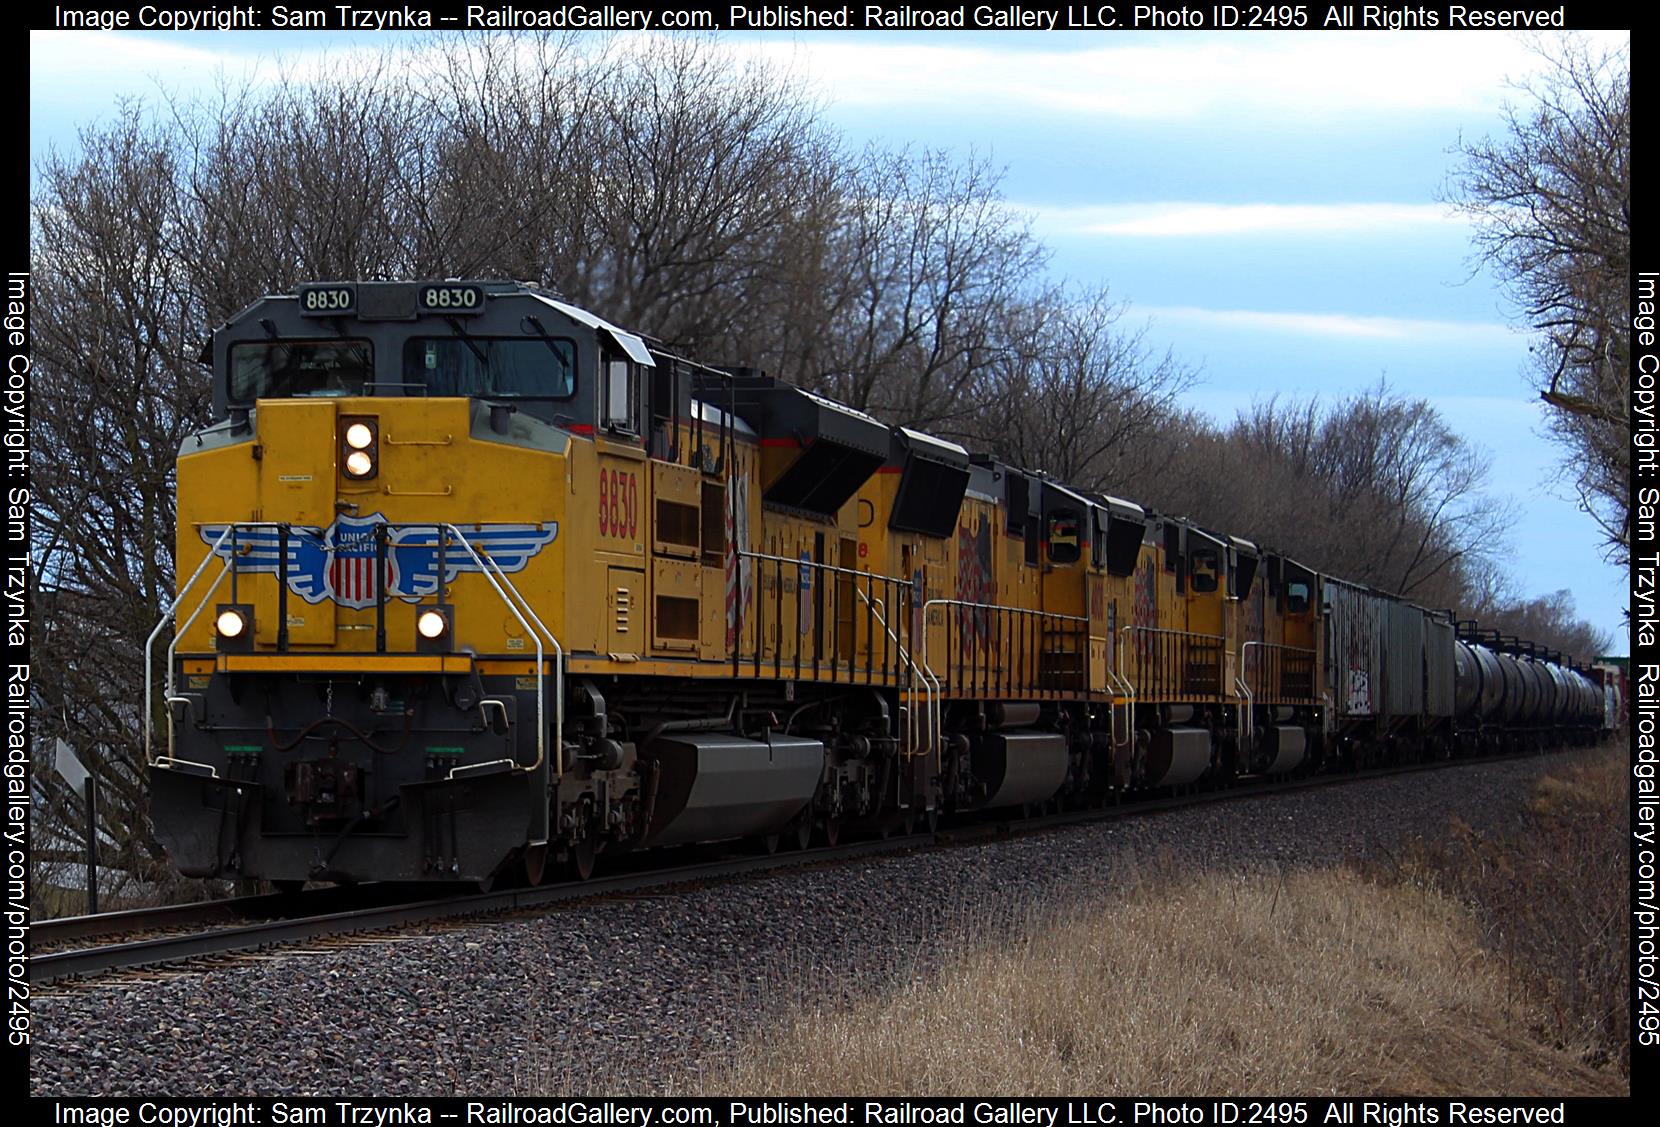 UP 8830 is a class EMD SD70ACe and  is pictured in Rosemount, Minnesota, USA.  This was taken along the UP Albert Lea Subdivision on the Union Pacific Railroad. Photo Copyright: Sam Trzynka uploaded to Railroad Gallery on 11/26/2023. This photograph of UP 8830 was taken on Sunday, April 10, 2022. All Rights Reserved. 